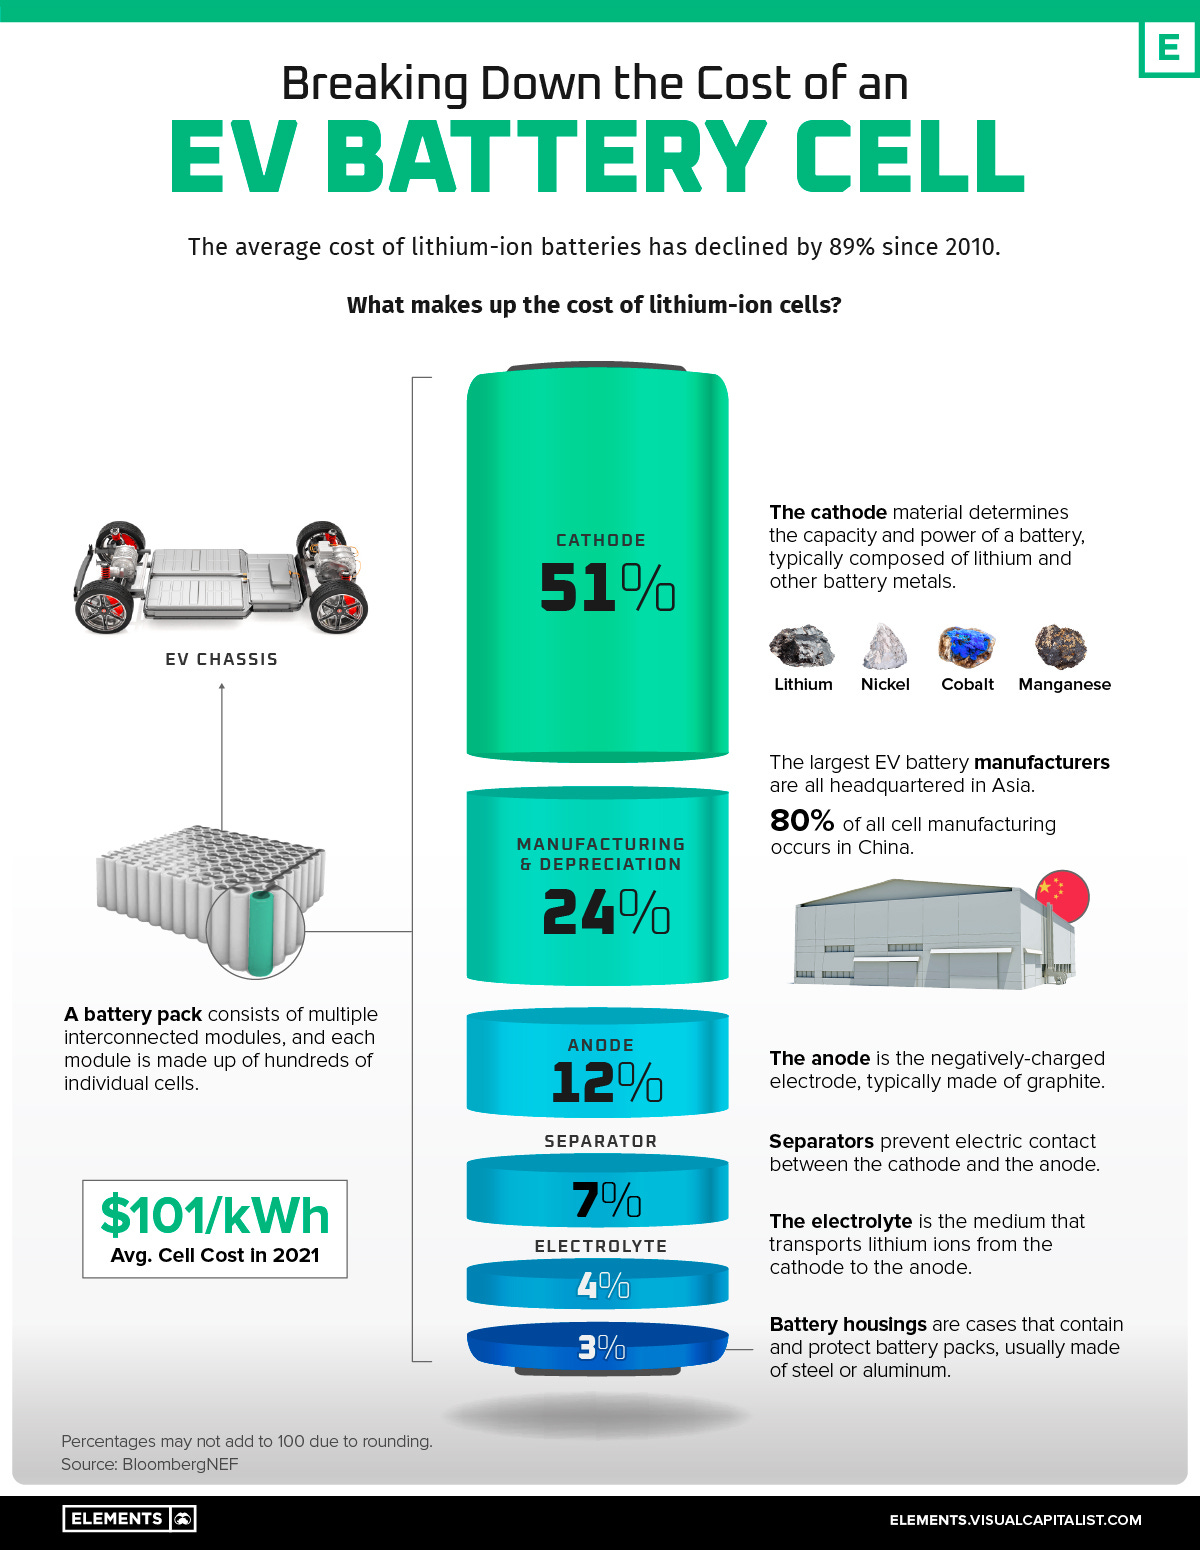 The cost of a lithium-ion battery cell